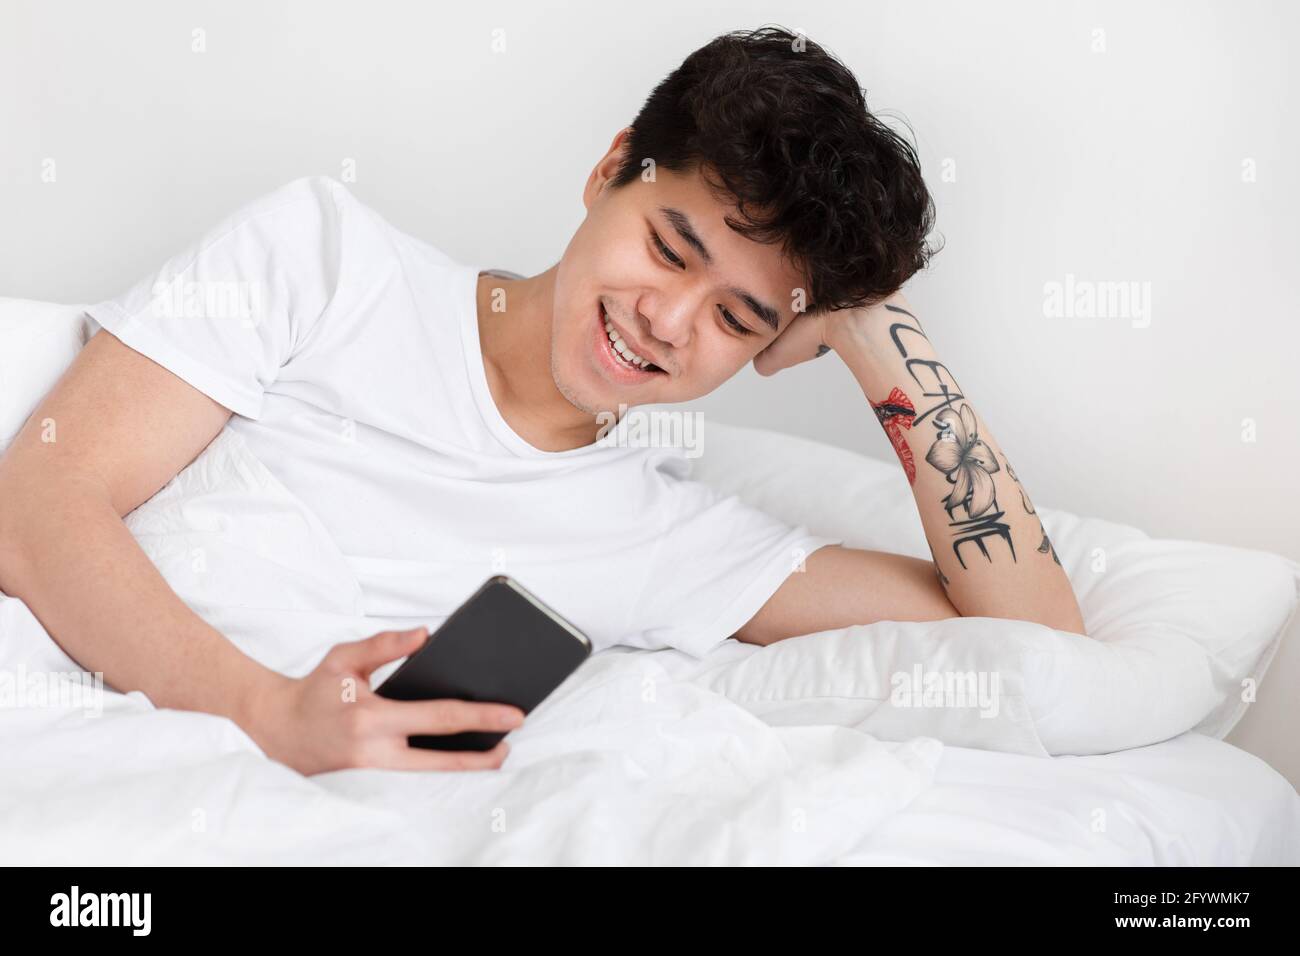 Weekend, free time, wake up with device in positive mood at home Stock Photo